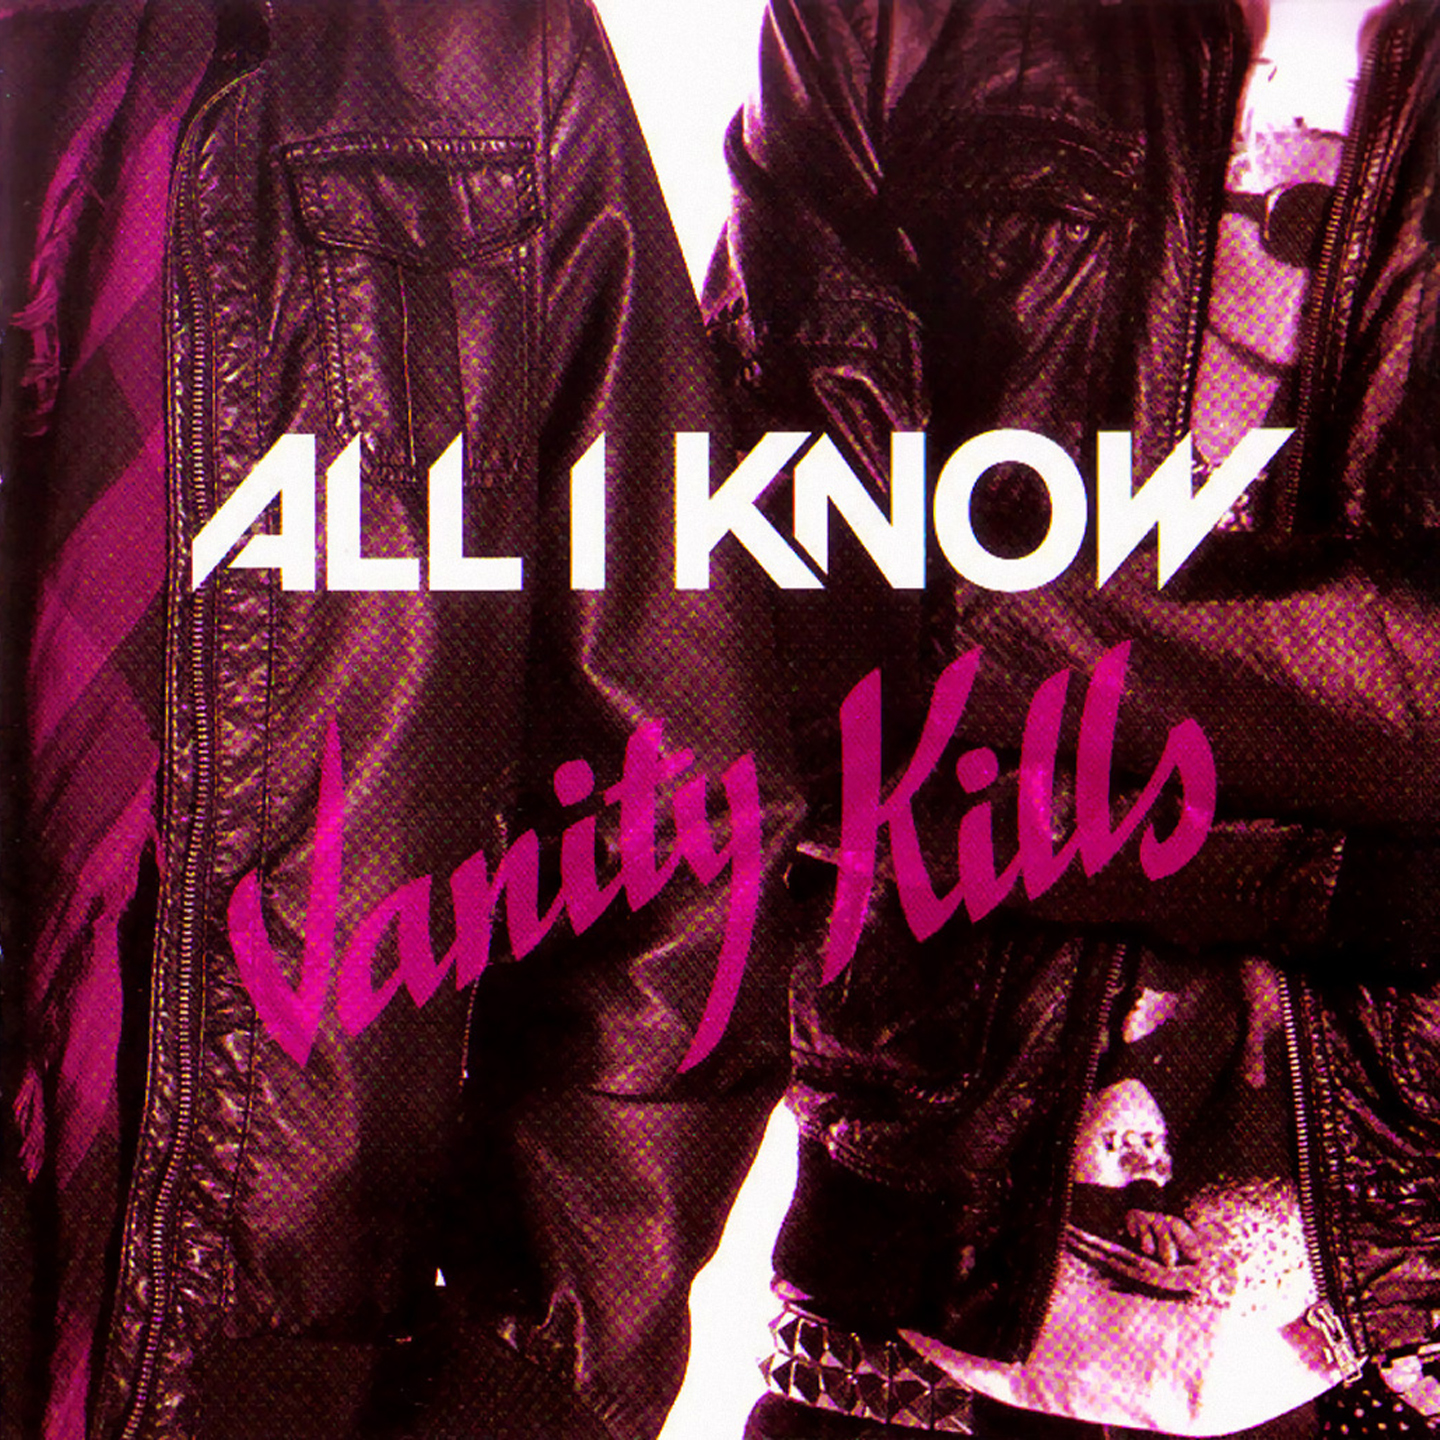 Game all i know. All i know - Vanity Kills - 2010. All i know Vanity Kills 2022. All i know - Vanity Kills - 2022 (2008). Back to back (Deluxe Edition).